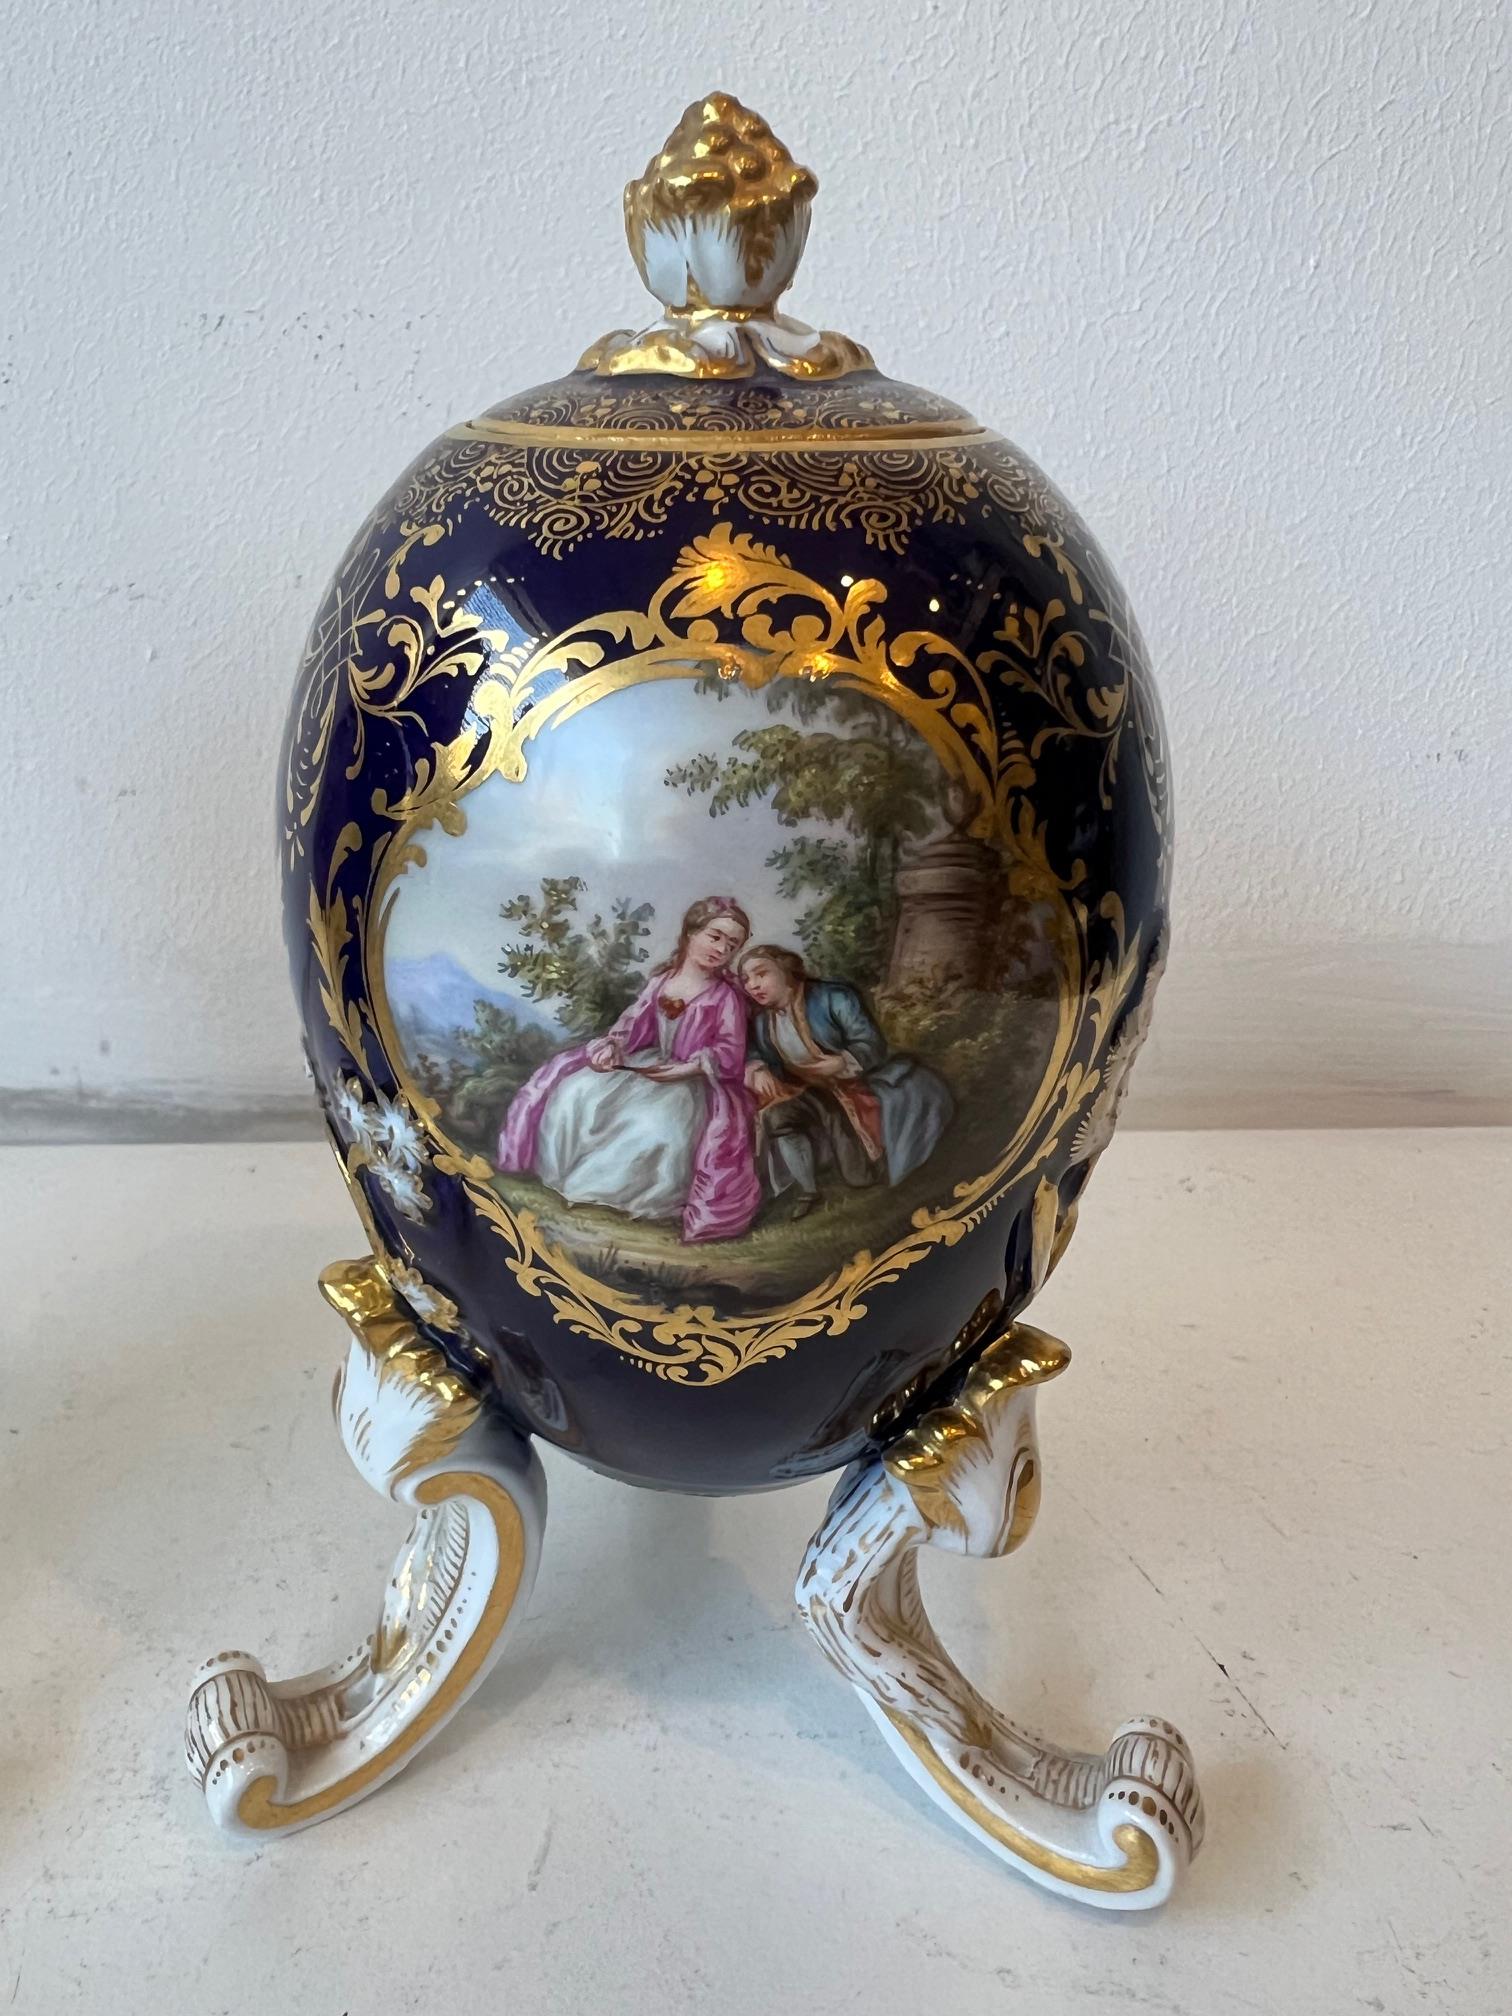 MEISSEN: A PAIR OF LATE 19TH / EARLY 20TH CENTURY PORCELAIN EGG SHAPED TEA CADDIES - Image 14 of 16